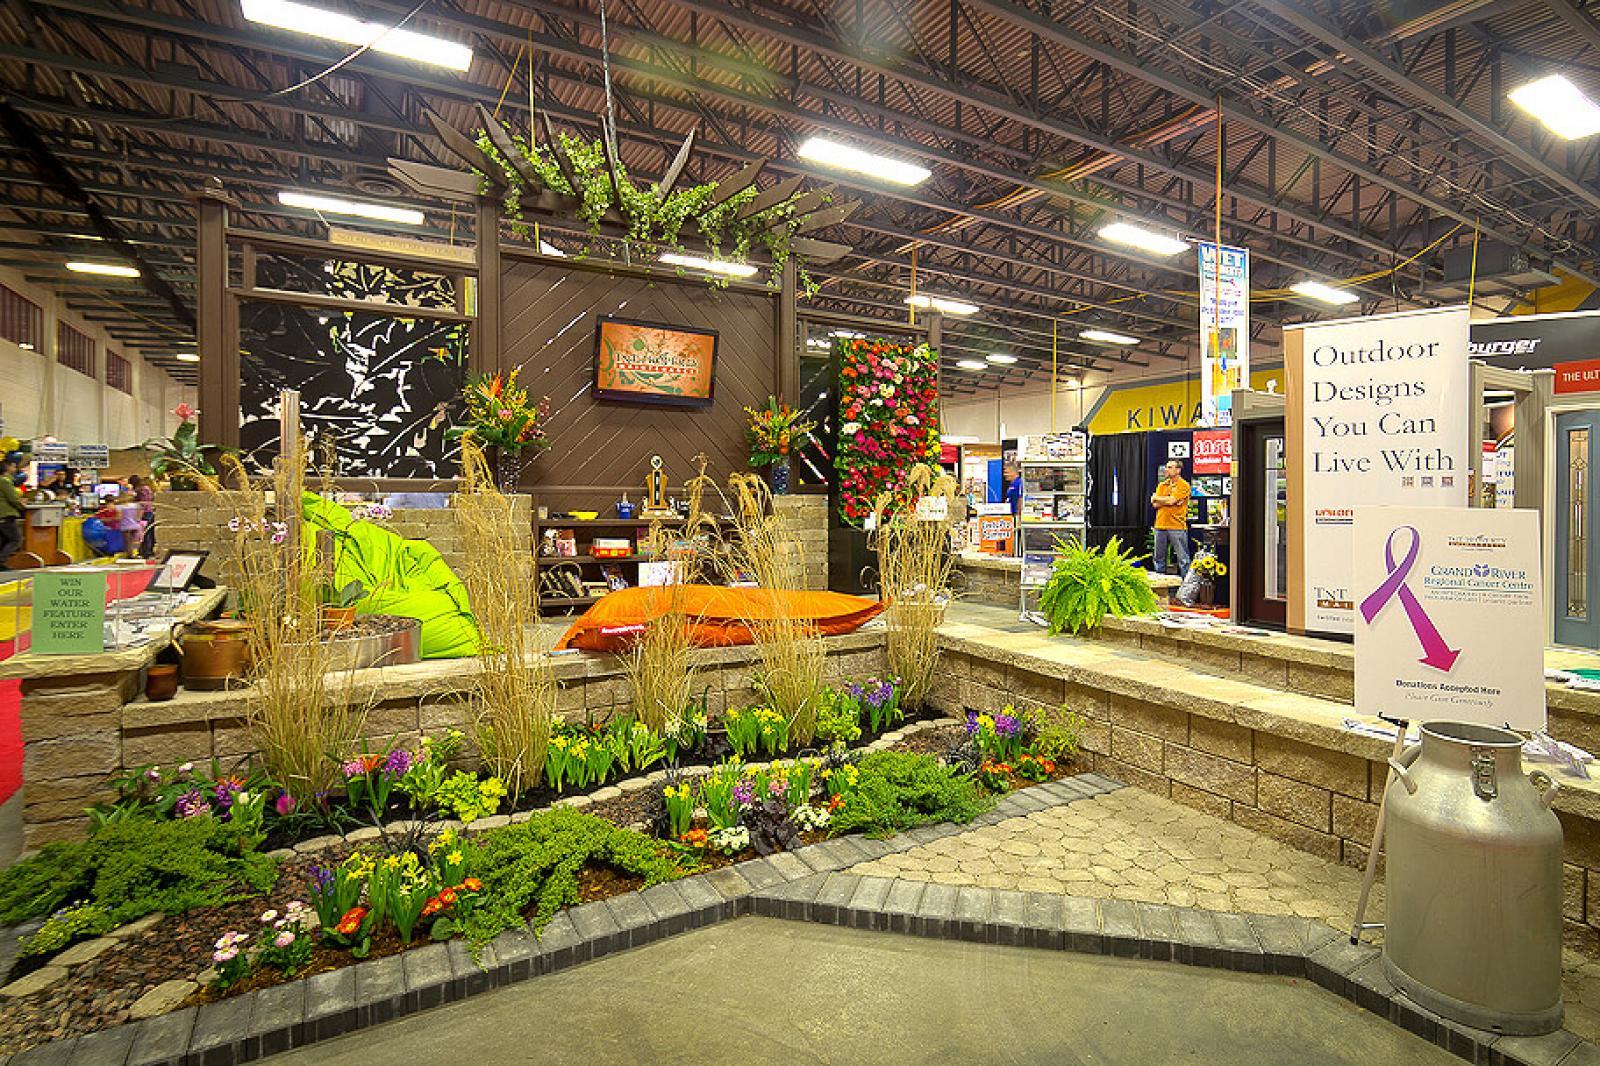 Vistors to the Kitchener/Waterloo Home and Garden Show  had a great first impression walking through the entrance garden created by TNT Landscaping.